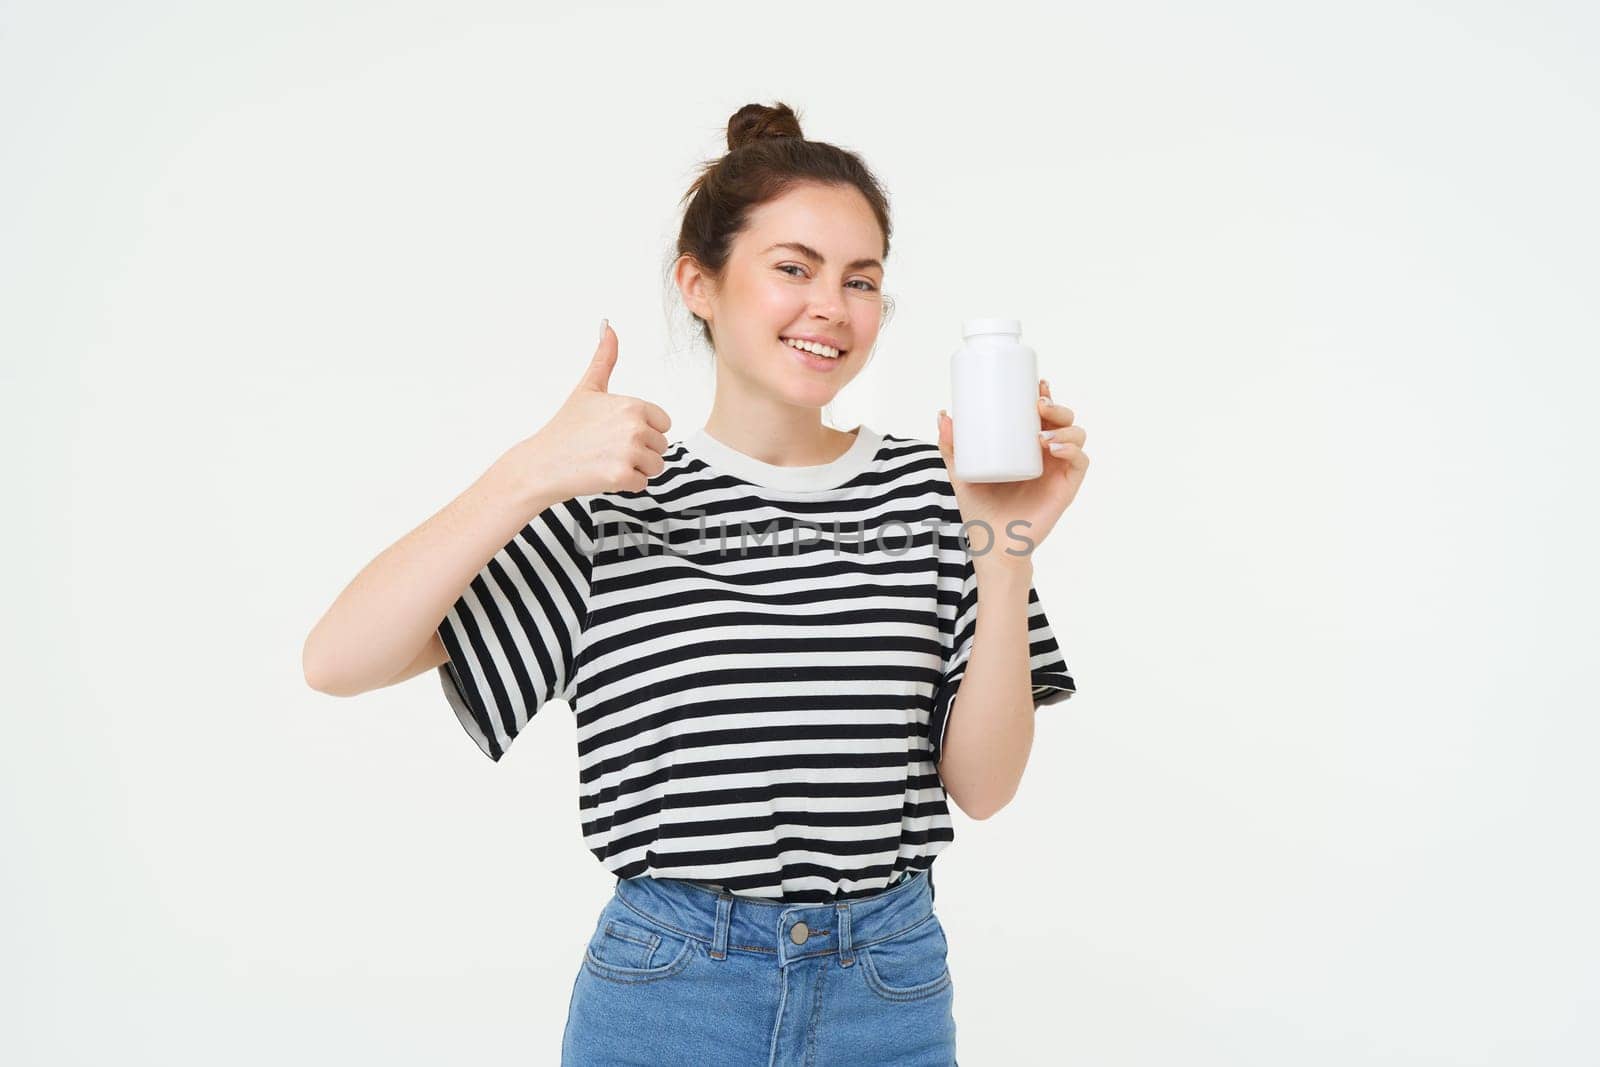 Portrait of beautiful, smiling brunette woman, shows thumbs up and bottle of vitamins, recommends dietary supplements, isolated against white background.